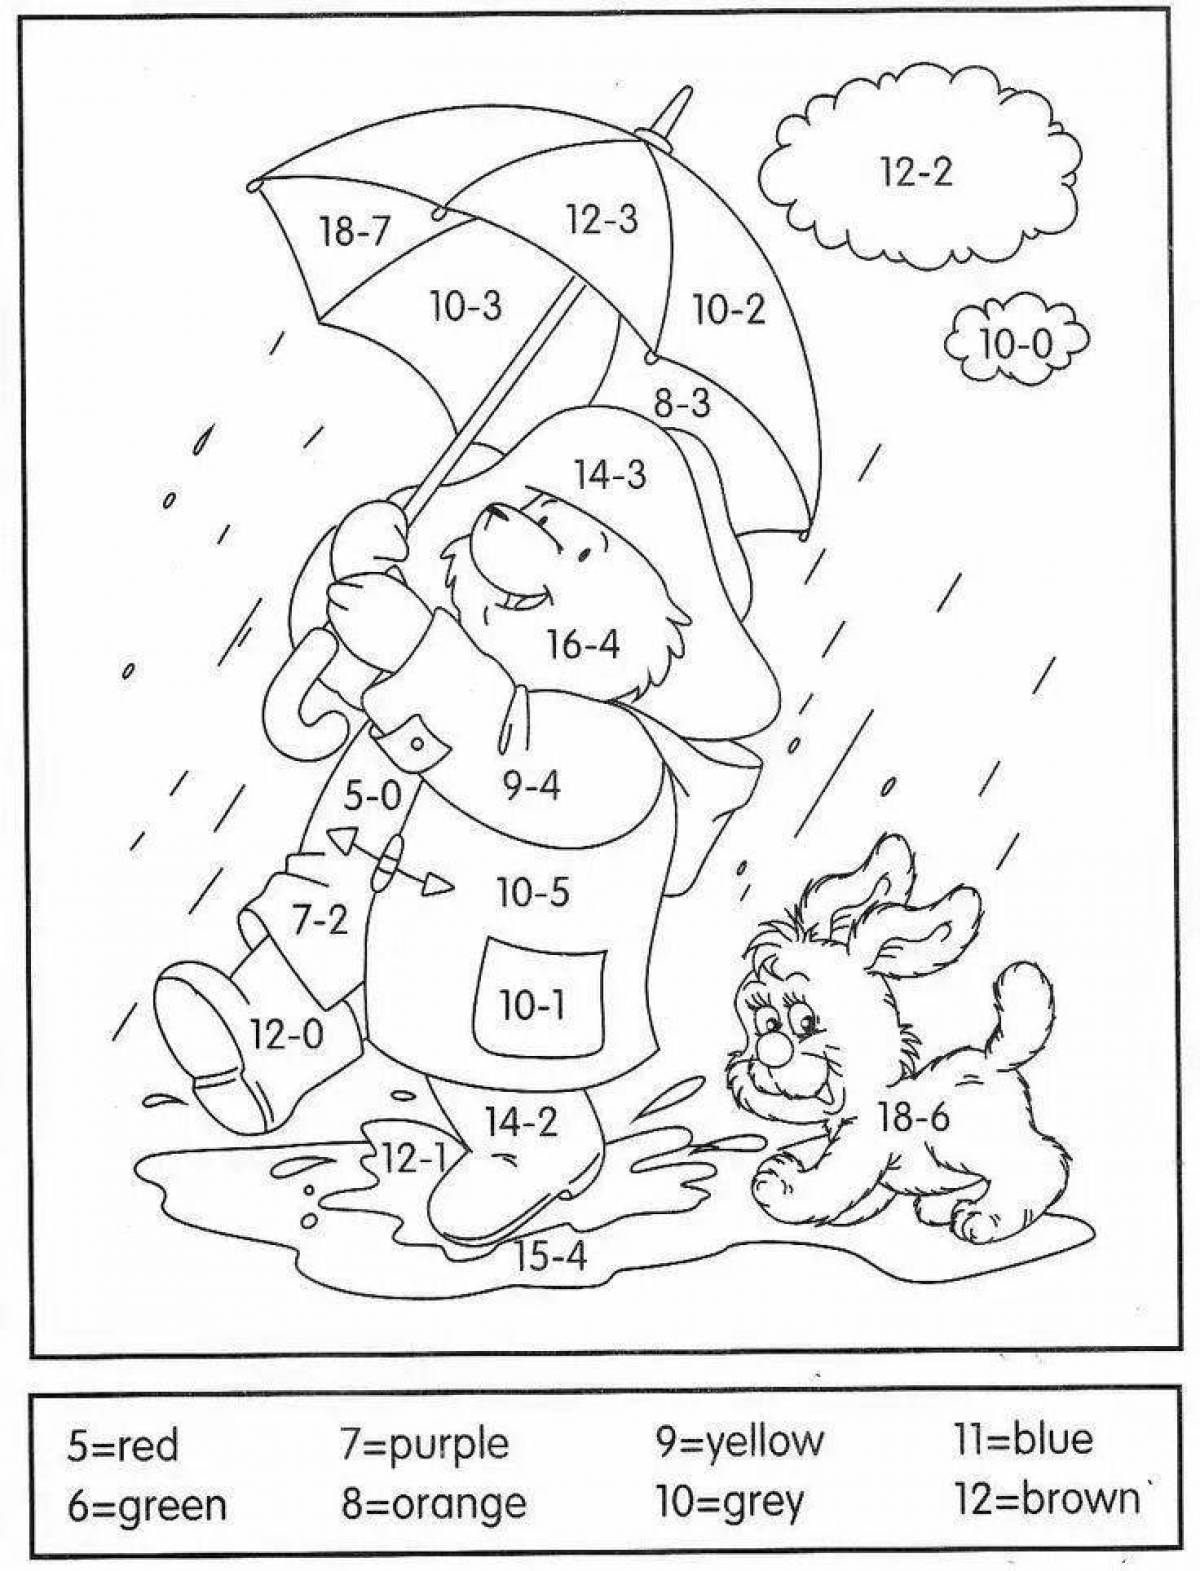 Coloring pages imaginative math Grade 1 score within 20